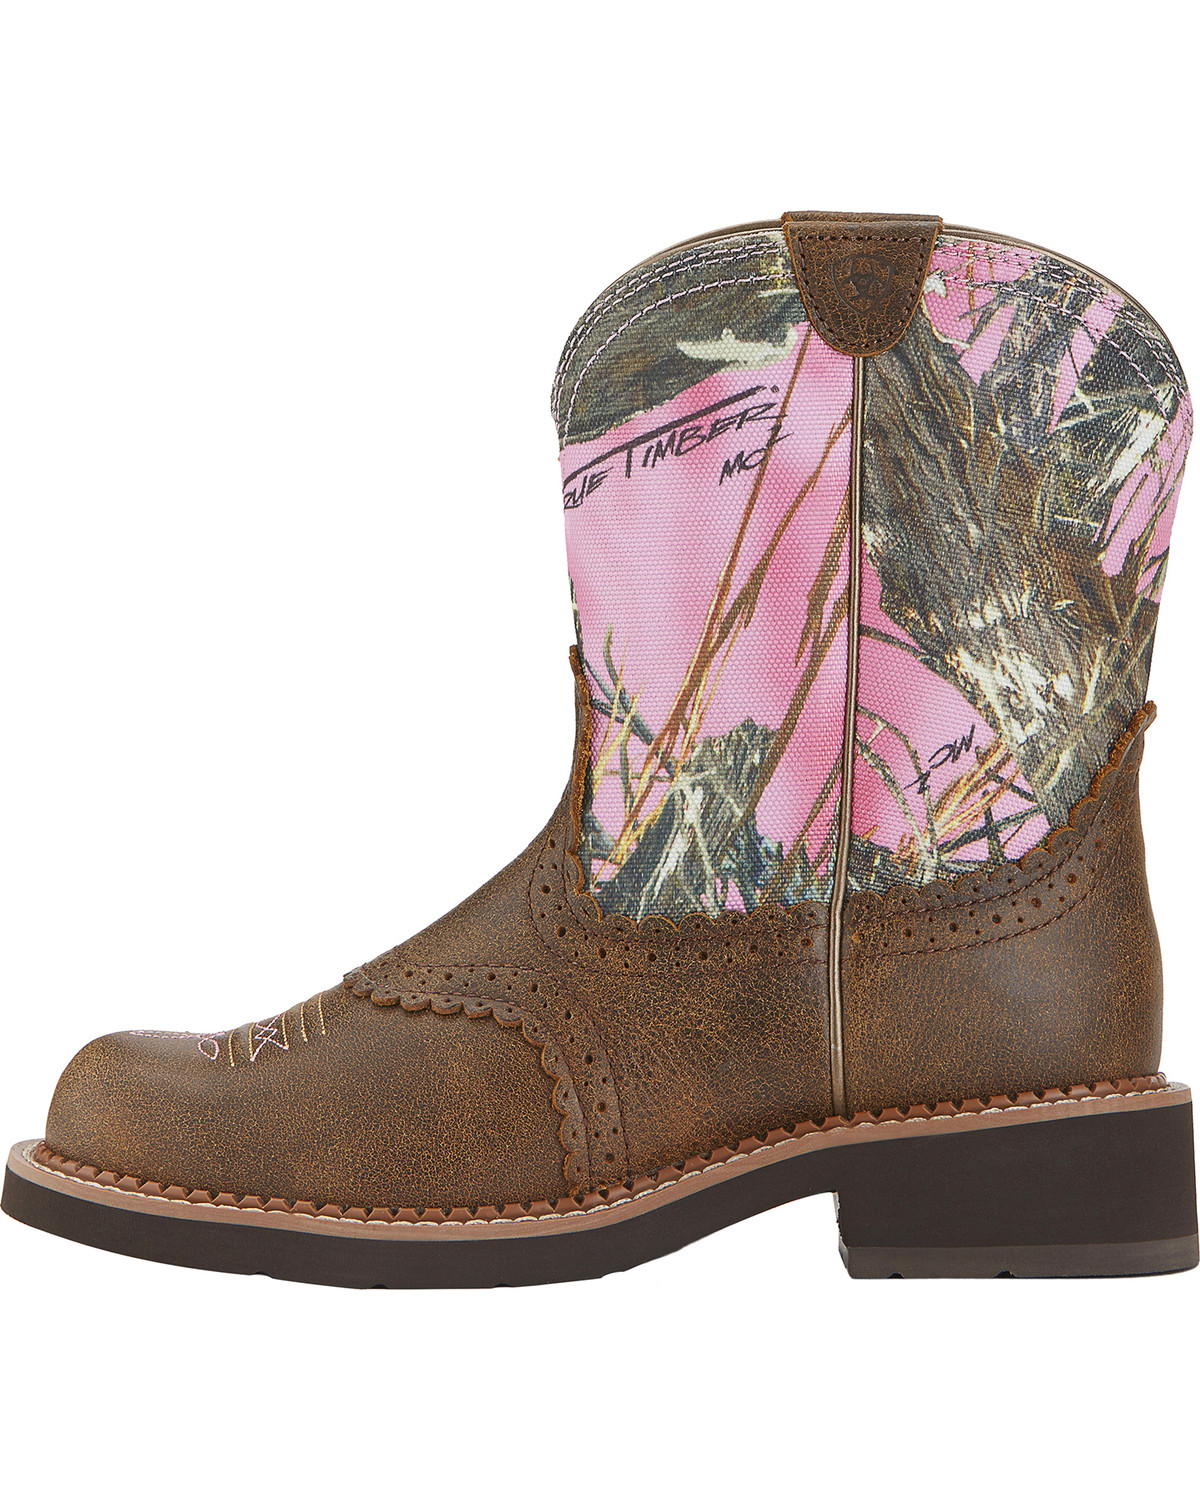 Ariat Fatbaby Vintage Bomber Pink Camo Cowgirl Boots - Round Toe | Sheplers